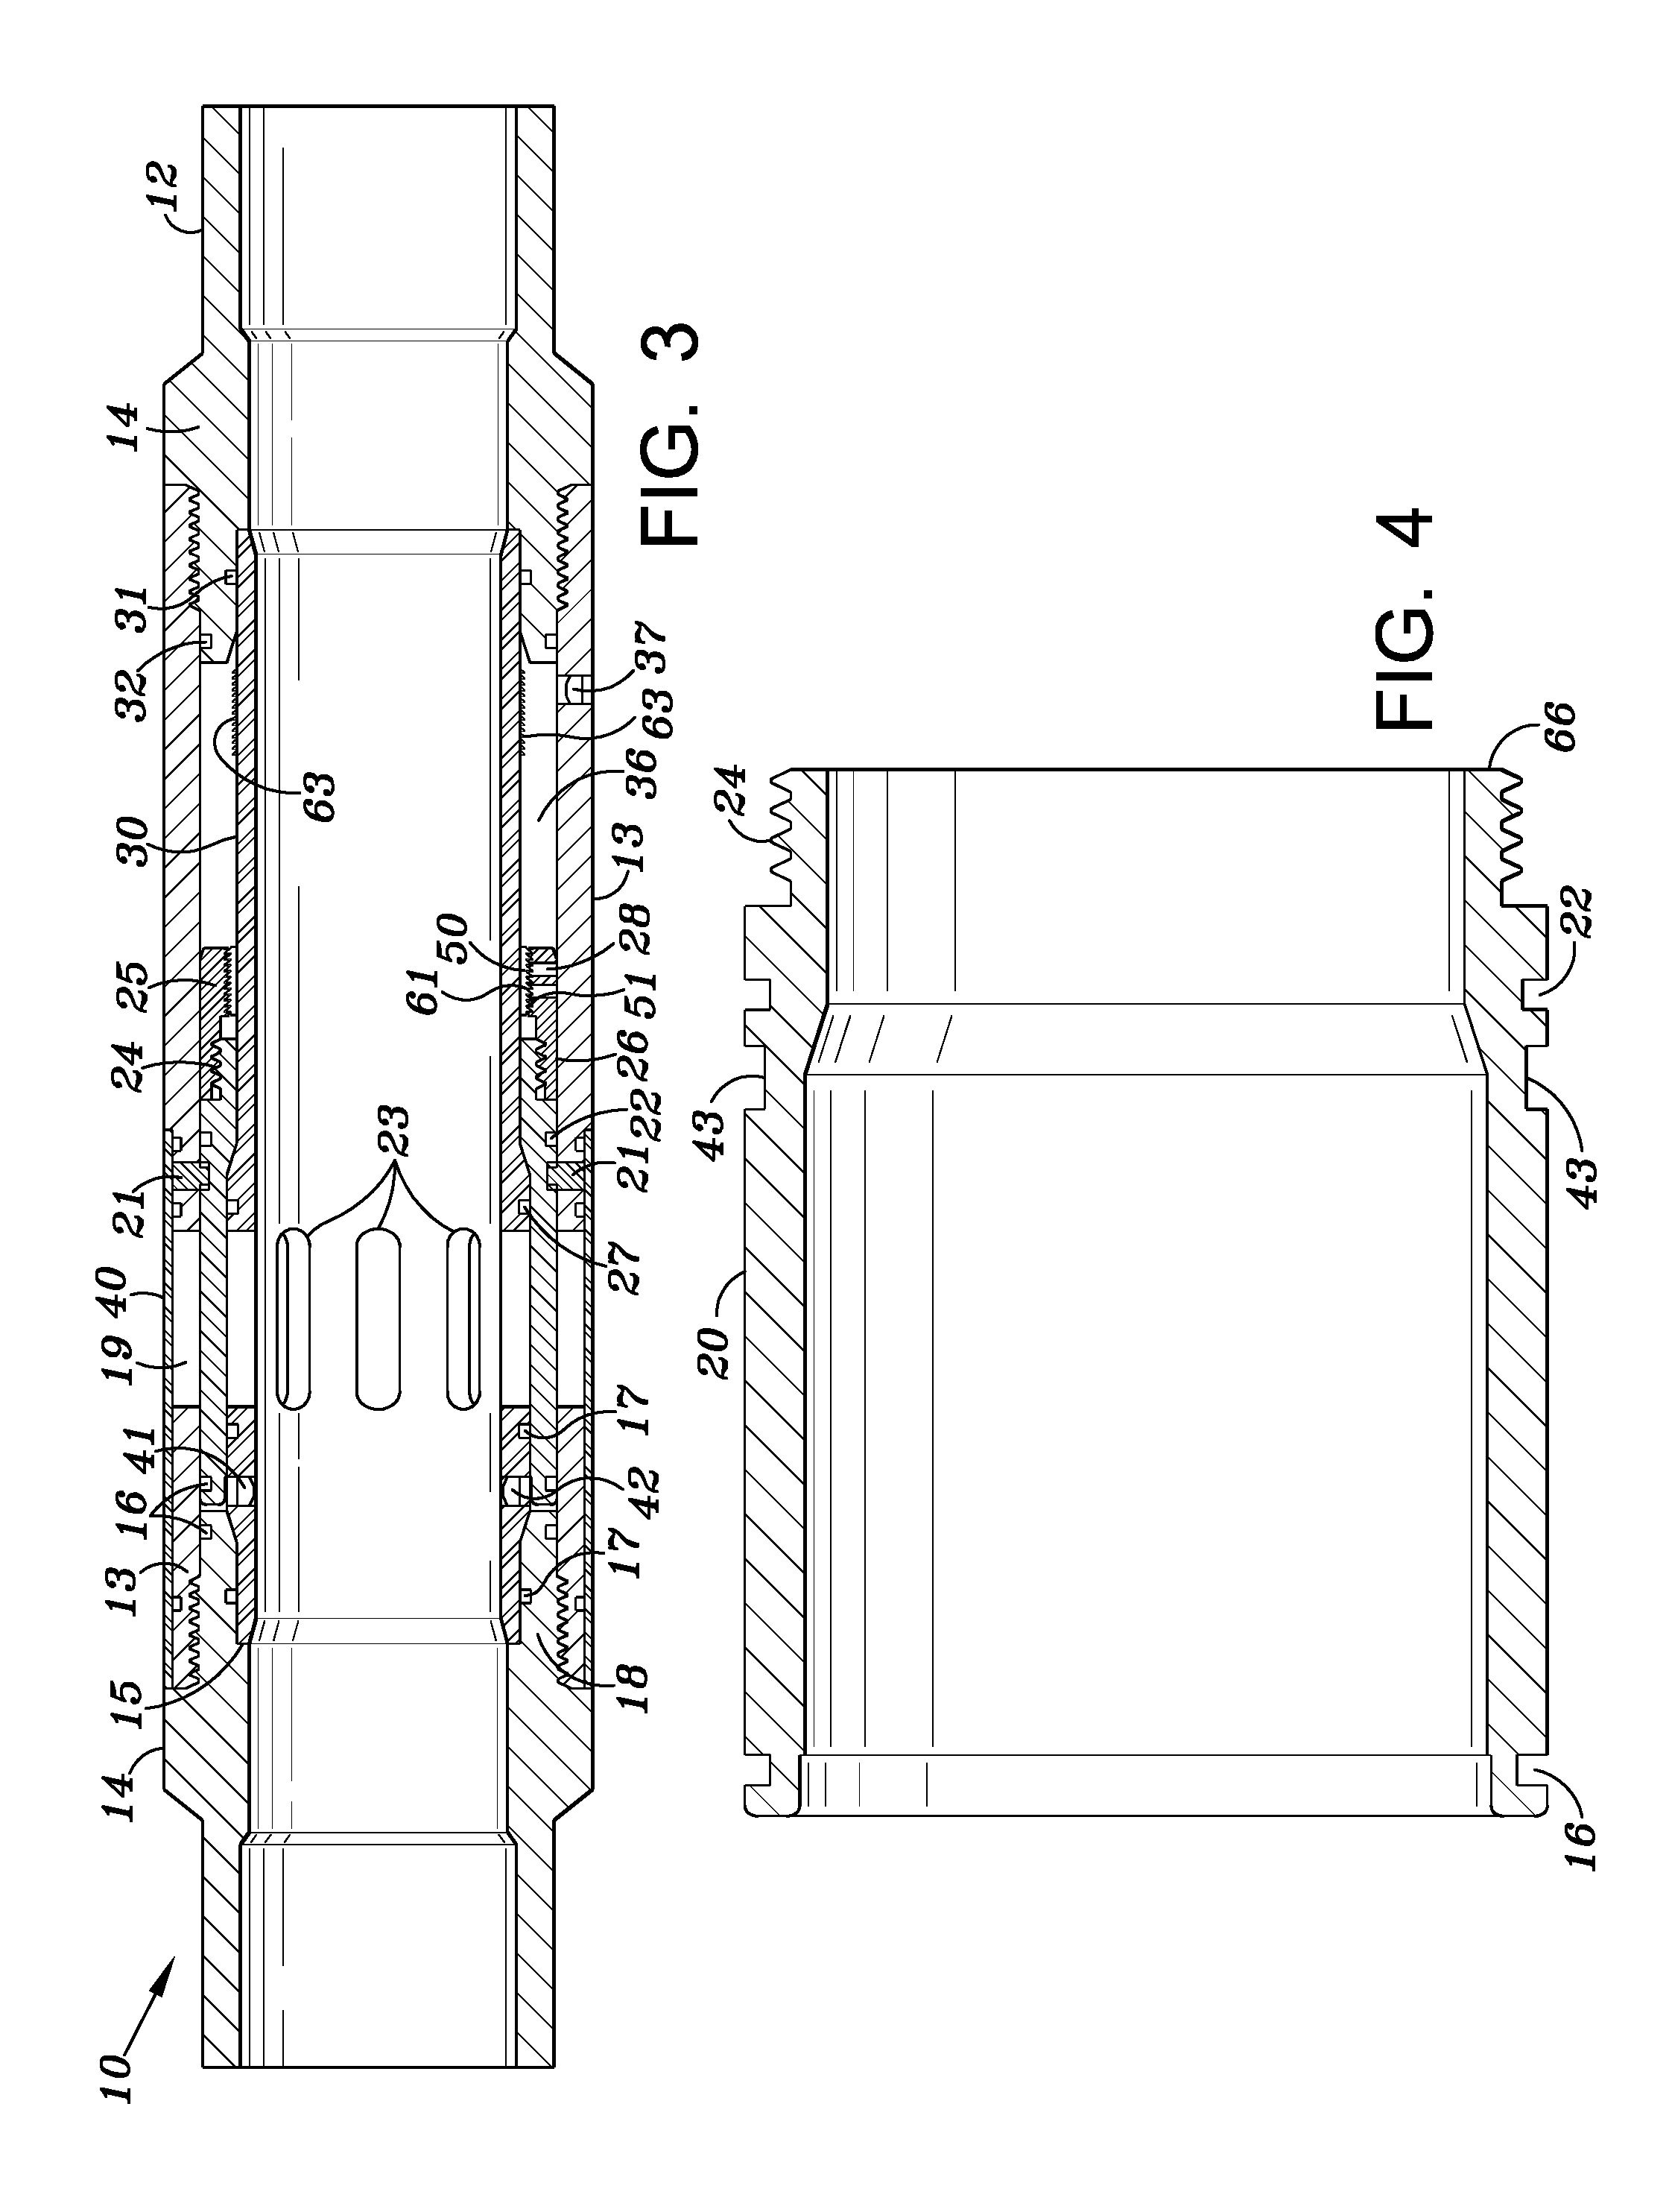 Valve for hydraulic fracturing through cement outside casing